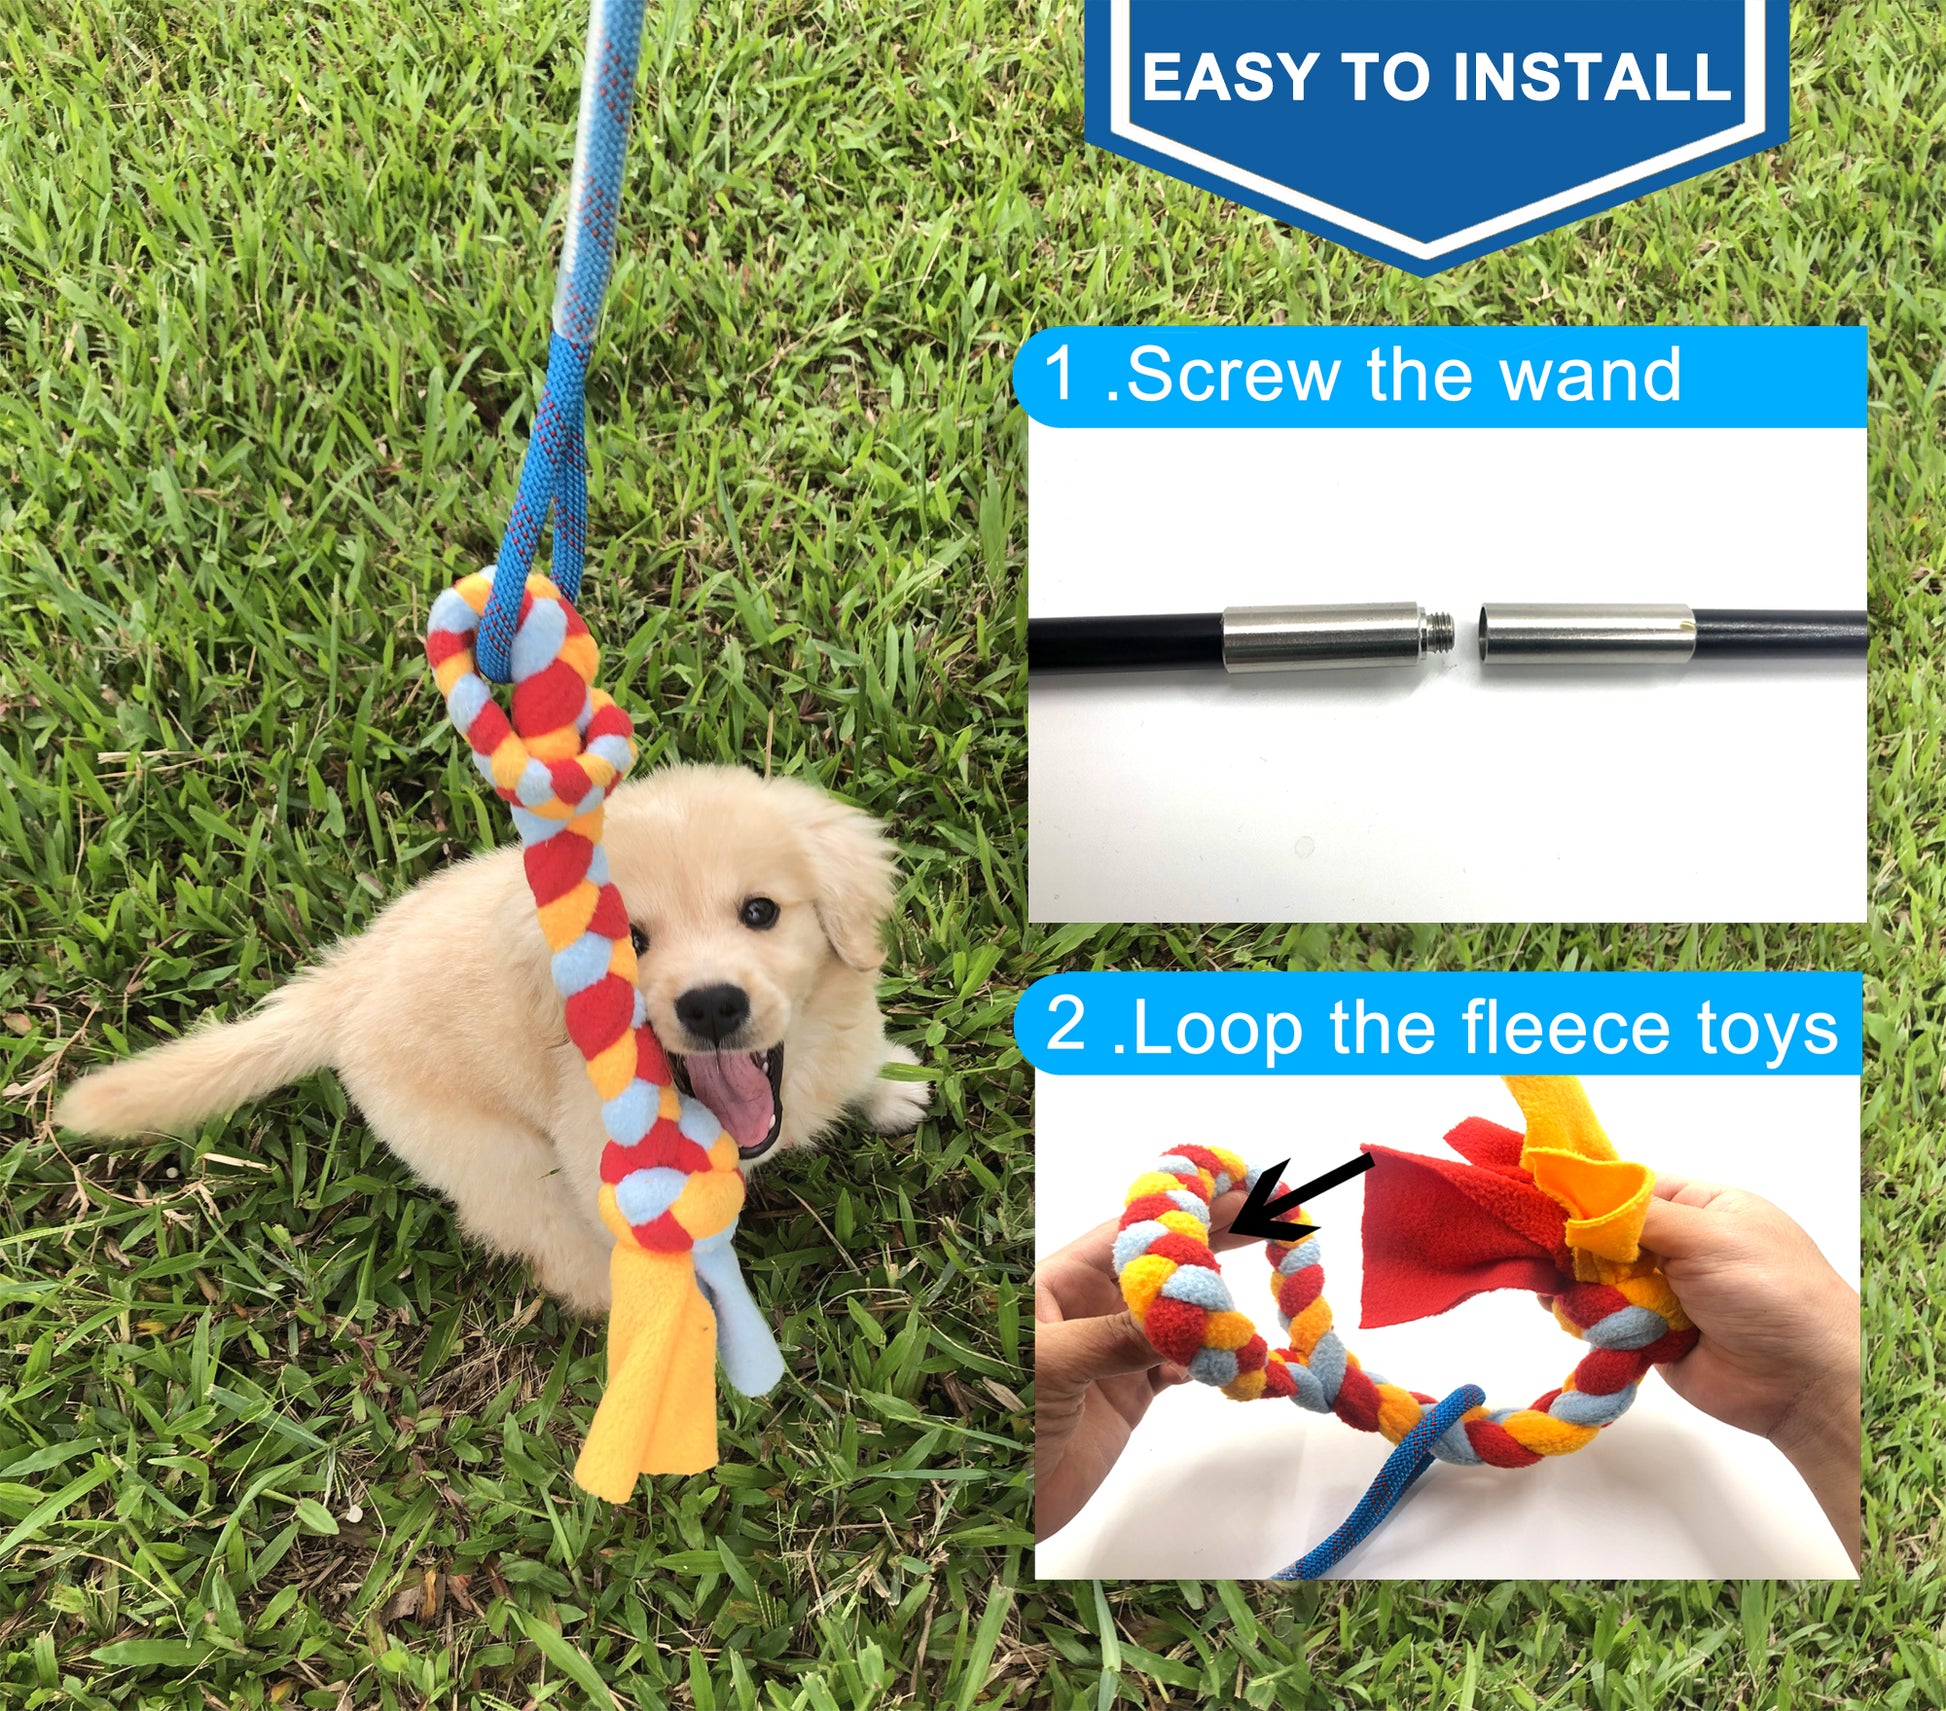 The Flirt Pole: Dog Toy or Life Changer?